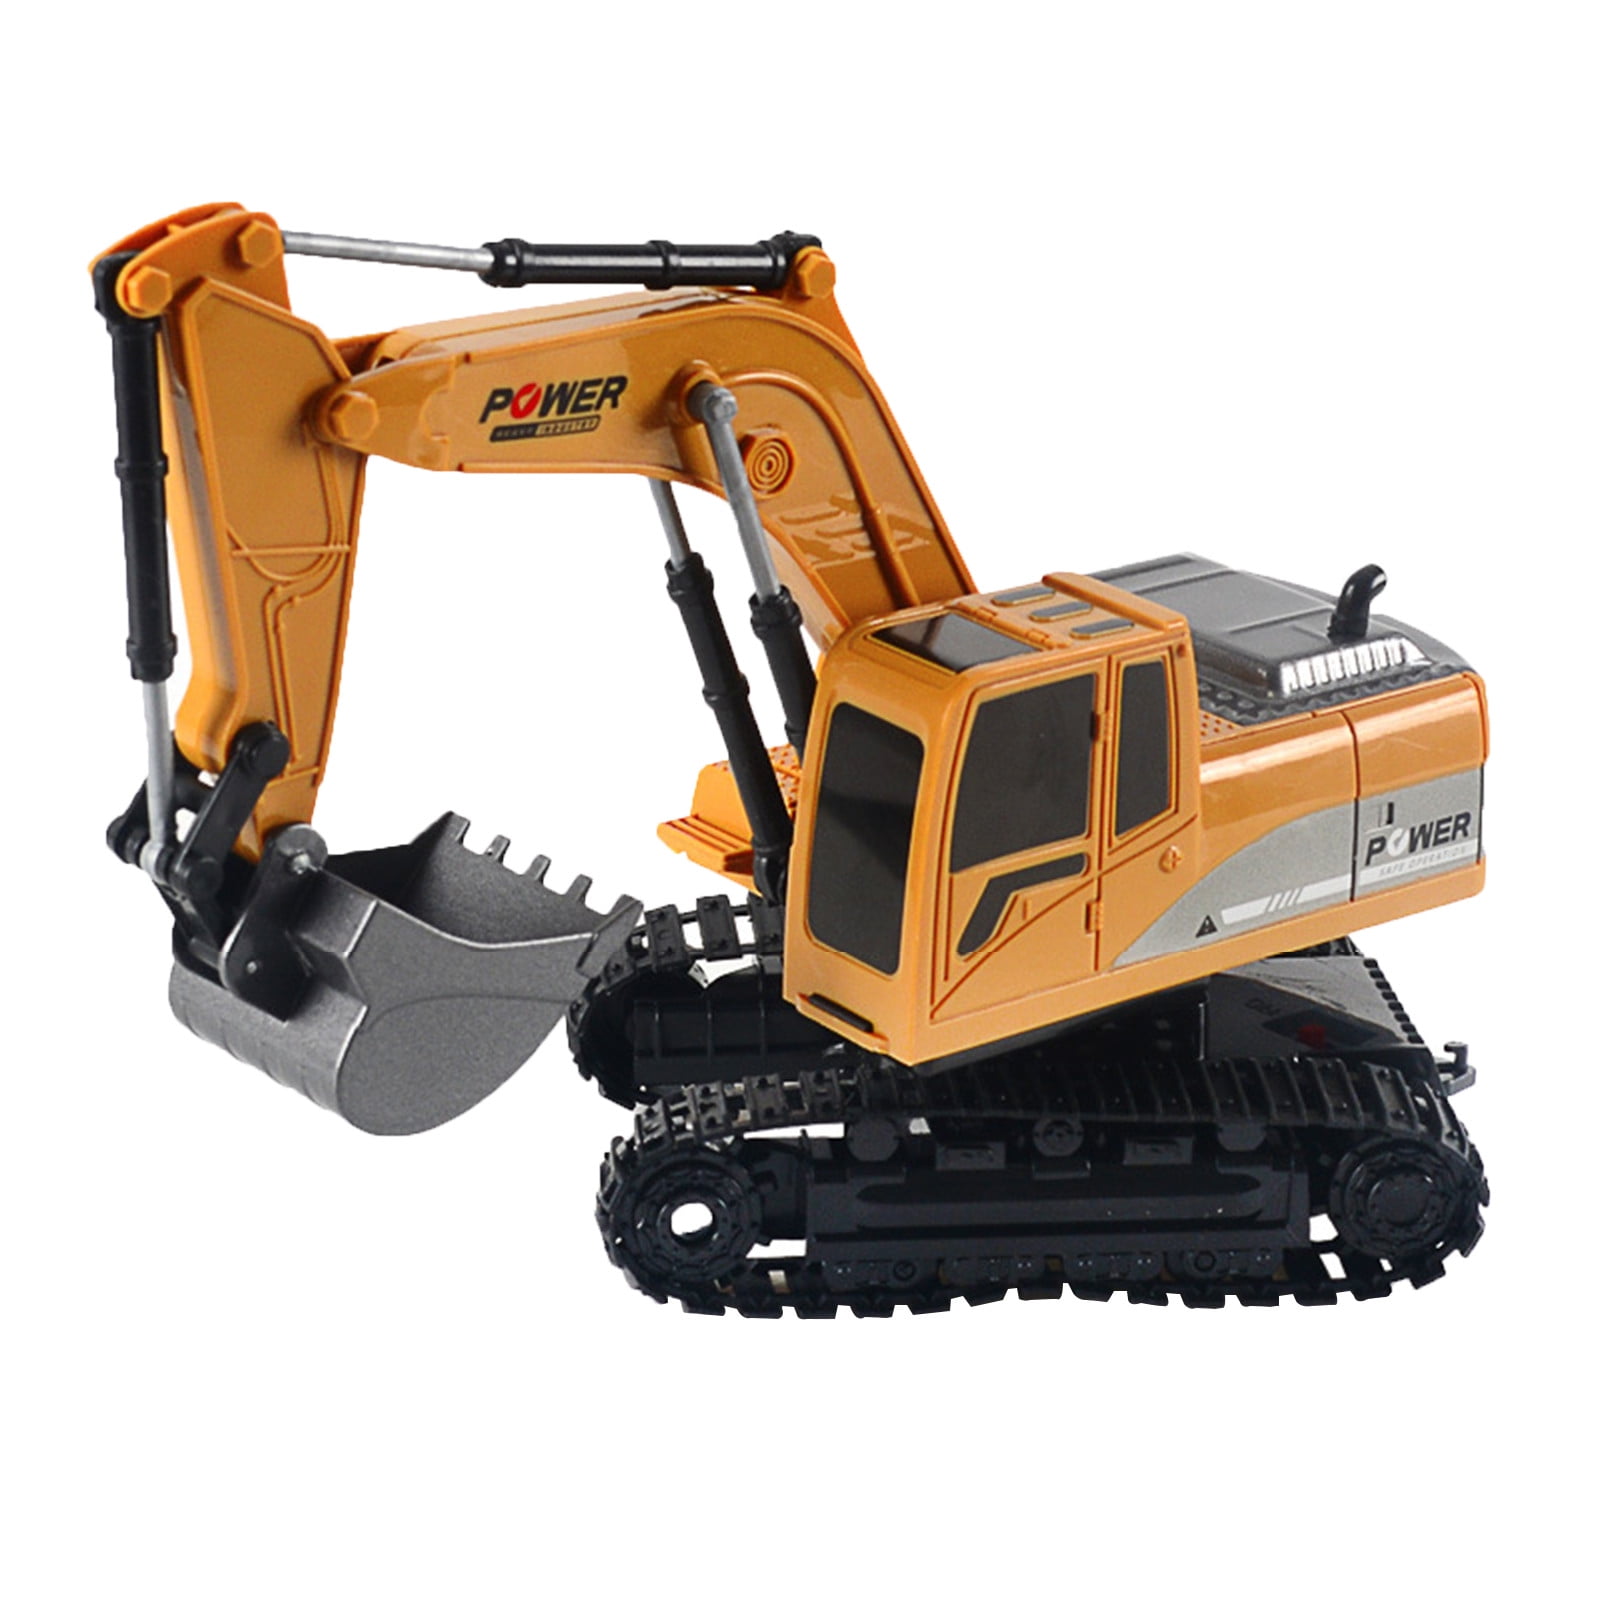 Double E Heavy Industry RC Excavator Remote Control Construction Vehicle 2.4G with Sound and Lights for Adults and Kids 4+